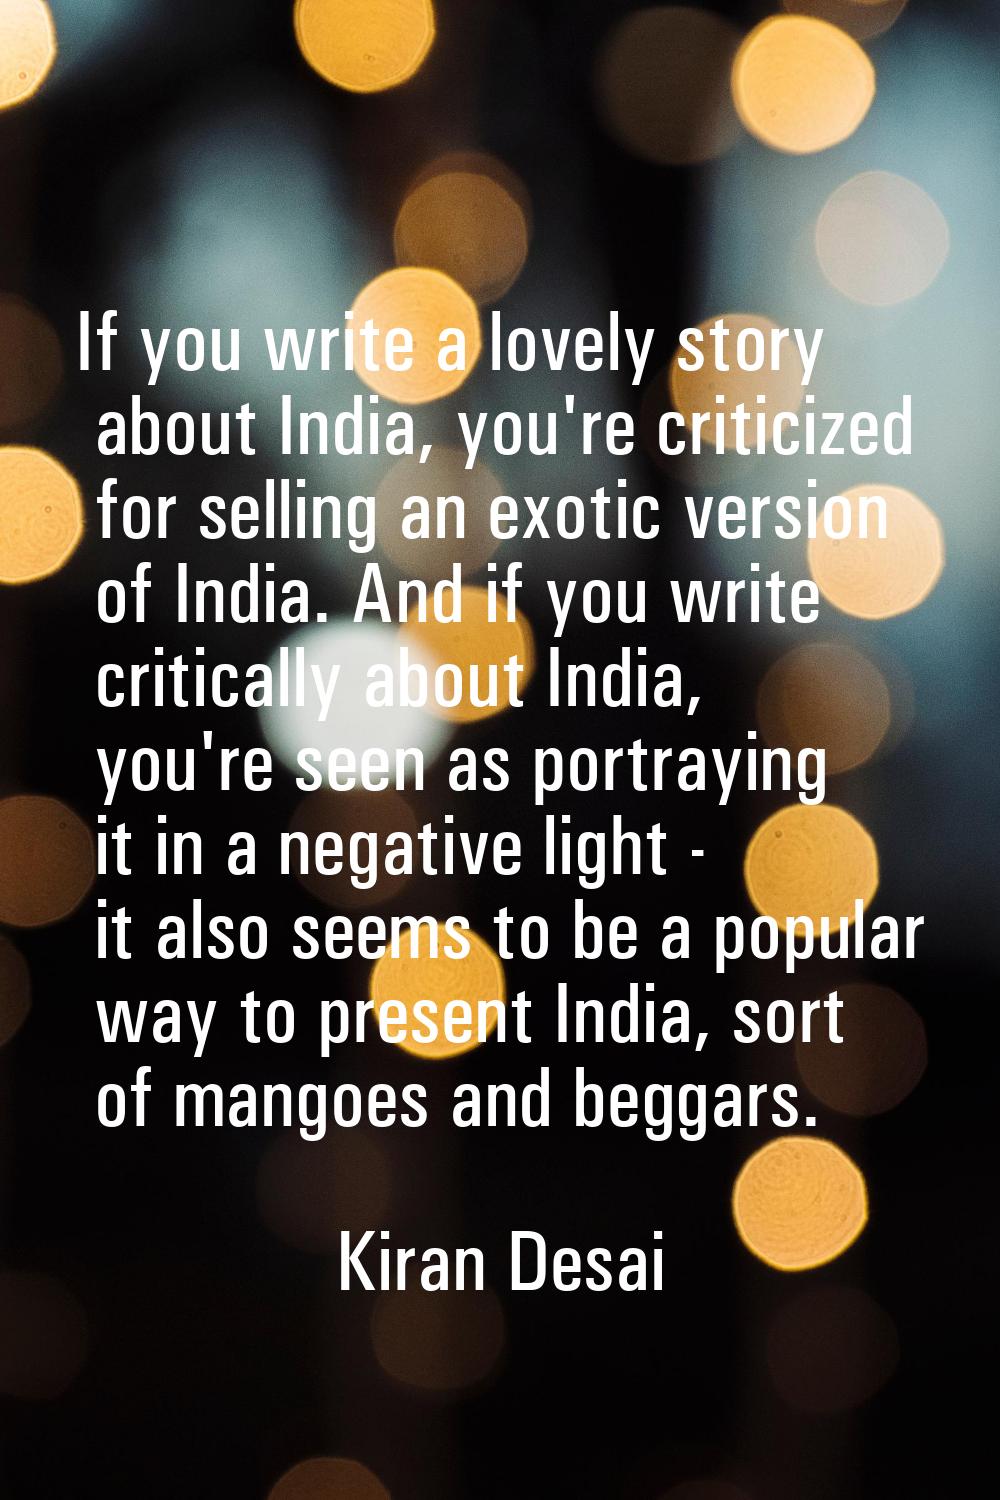 If you write a lovely story about India, you're criticized for selling an exotic version of India. 